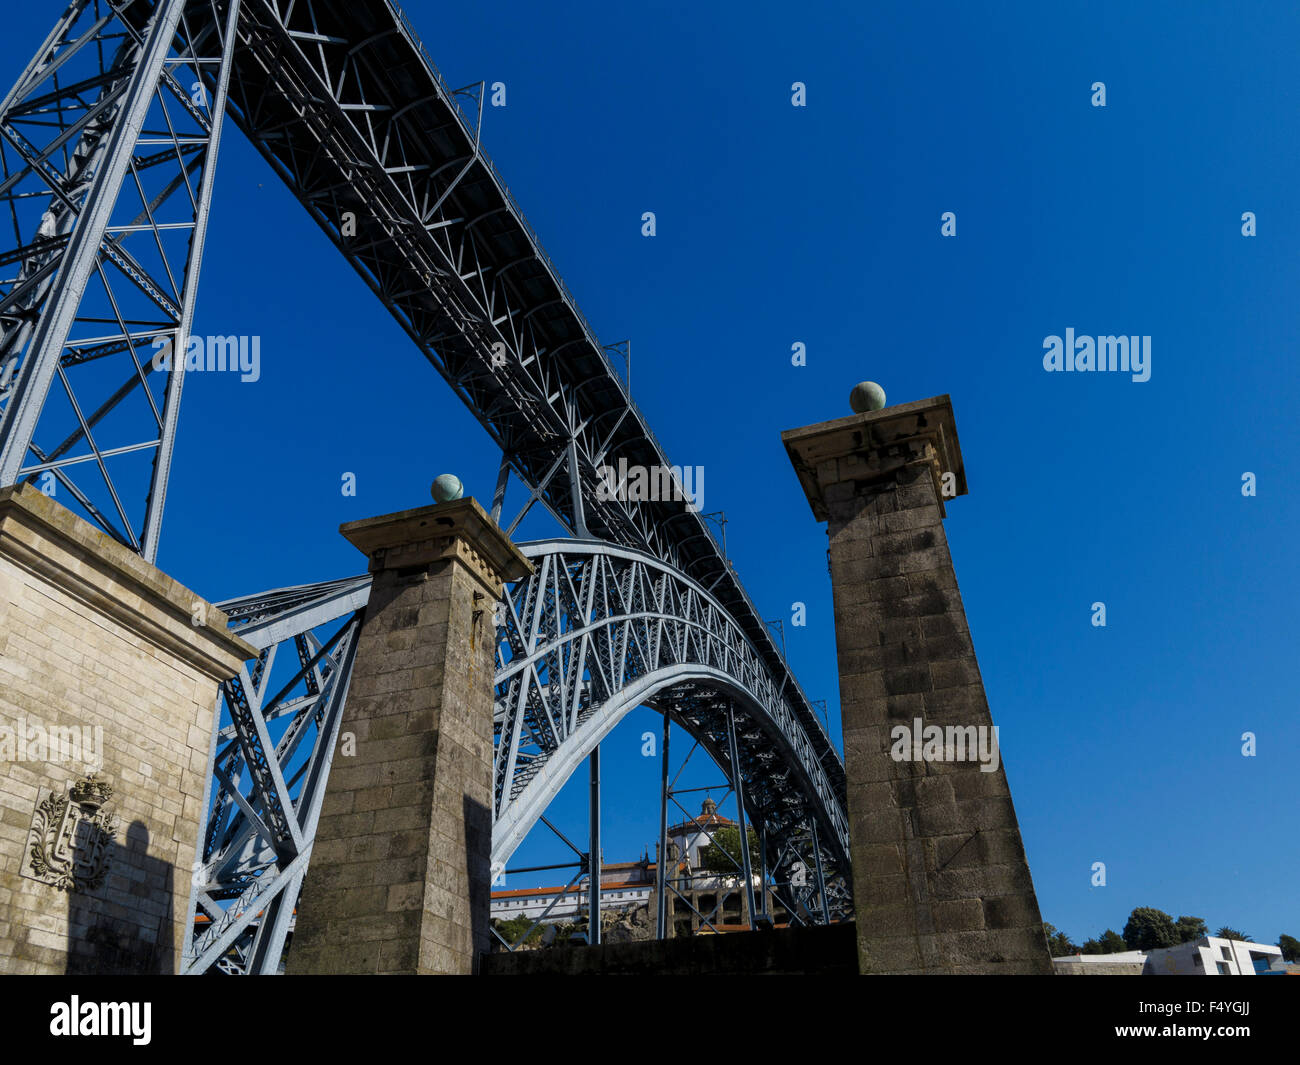 Detail of the supporting steel arched structure of the Ponte Luis 1 bridge Cais de Ribeira River Douro Porto (Oporto) Portugal Stock Photo